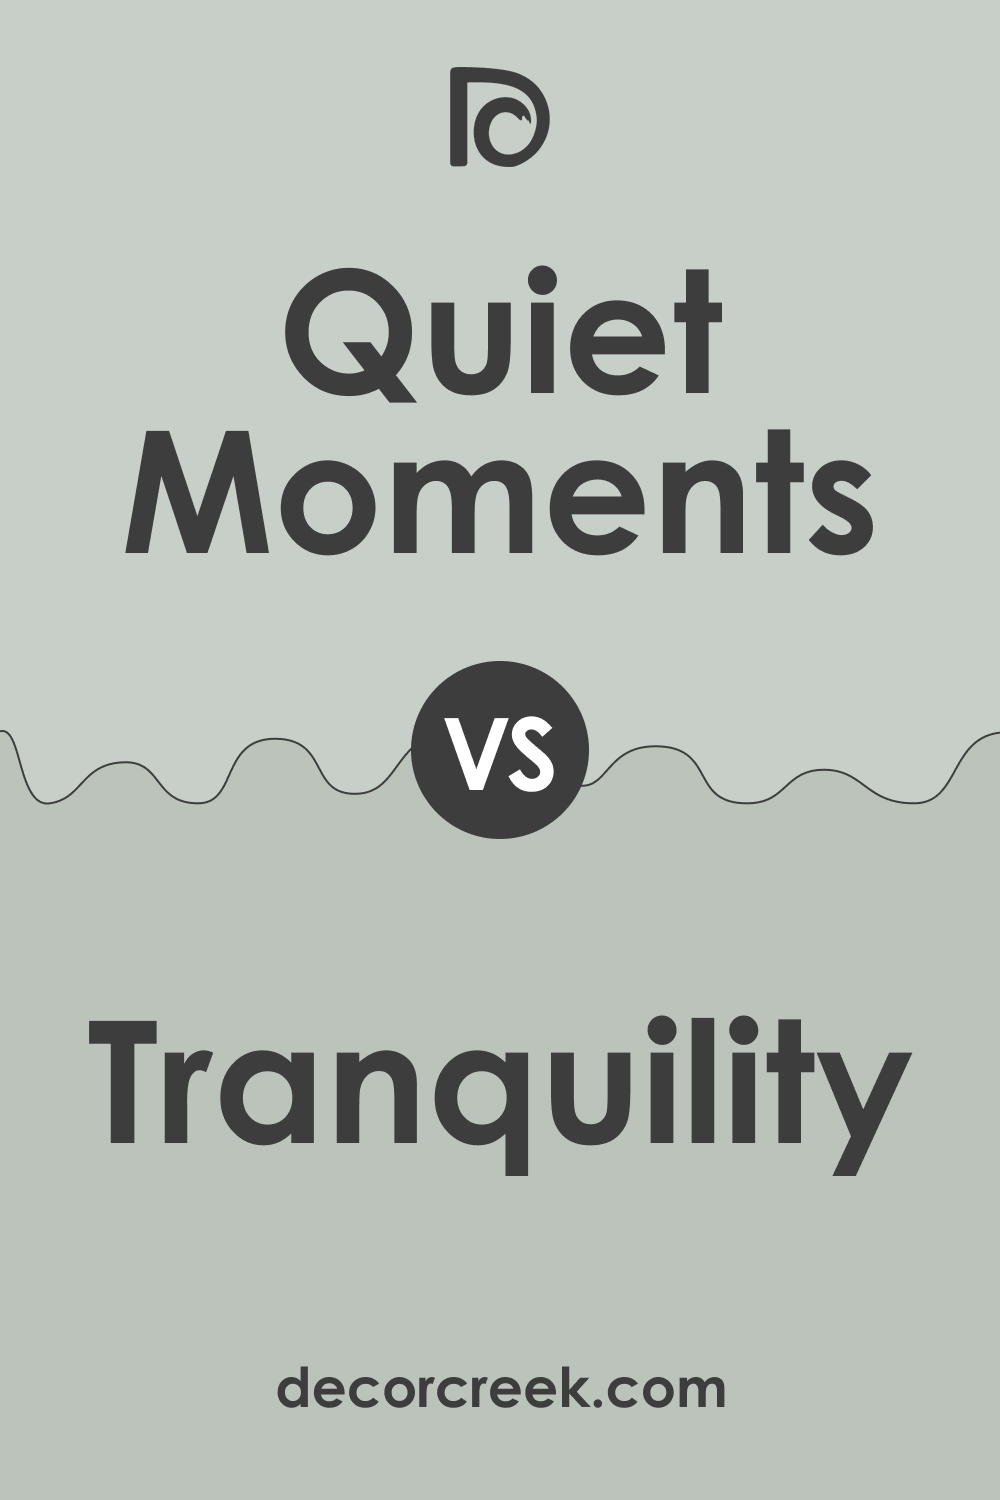 Quiet Moments vs Tranquility